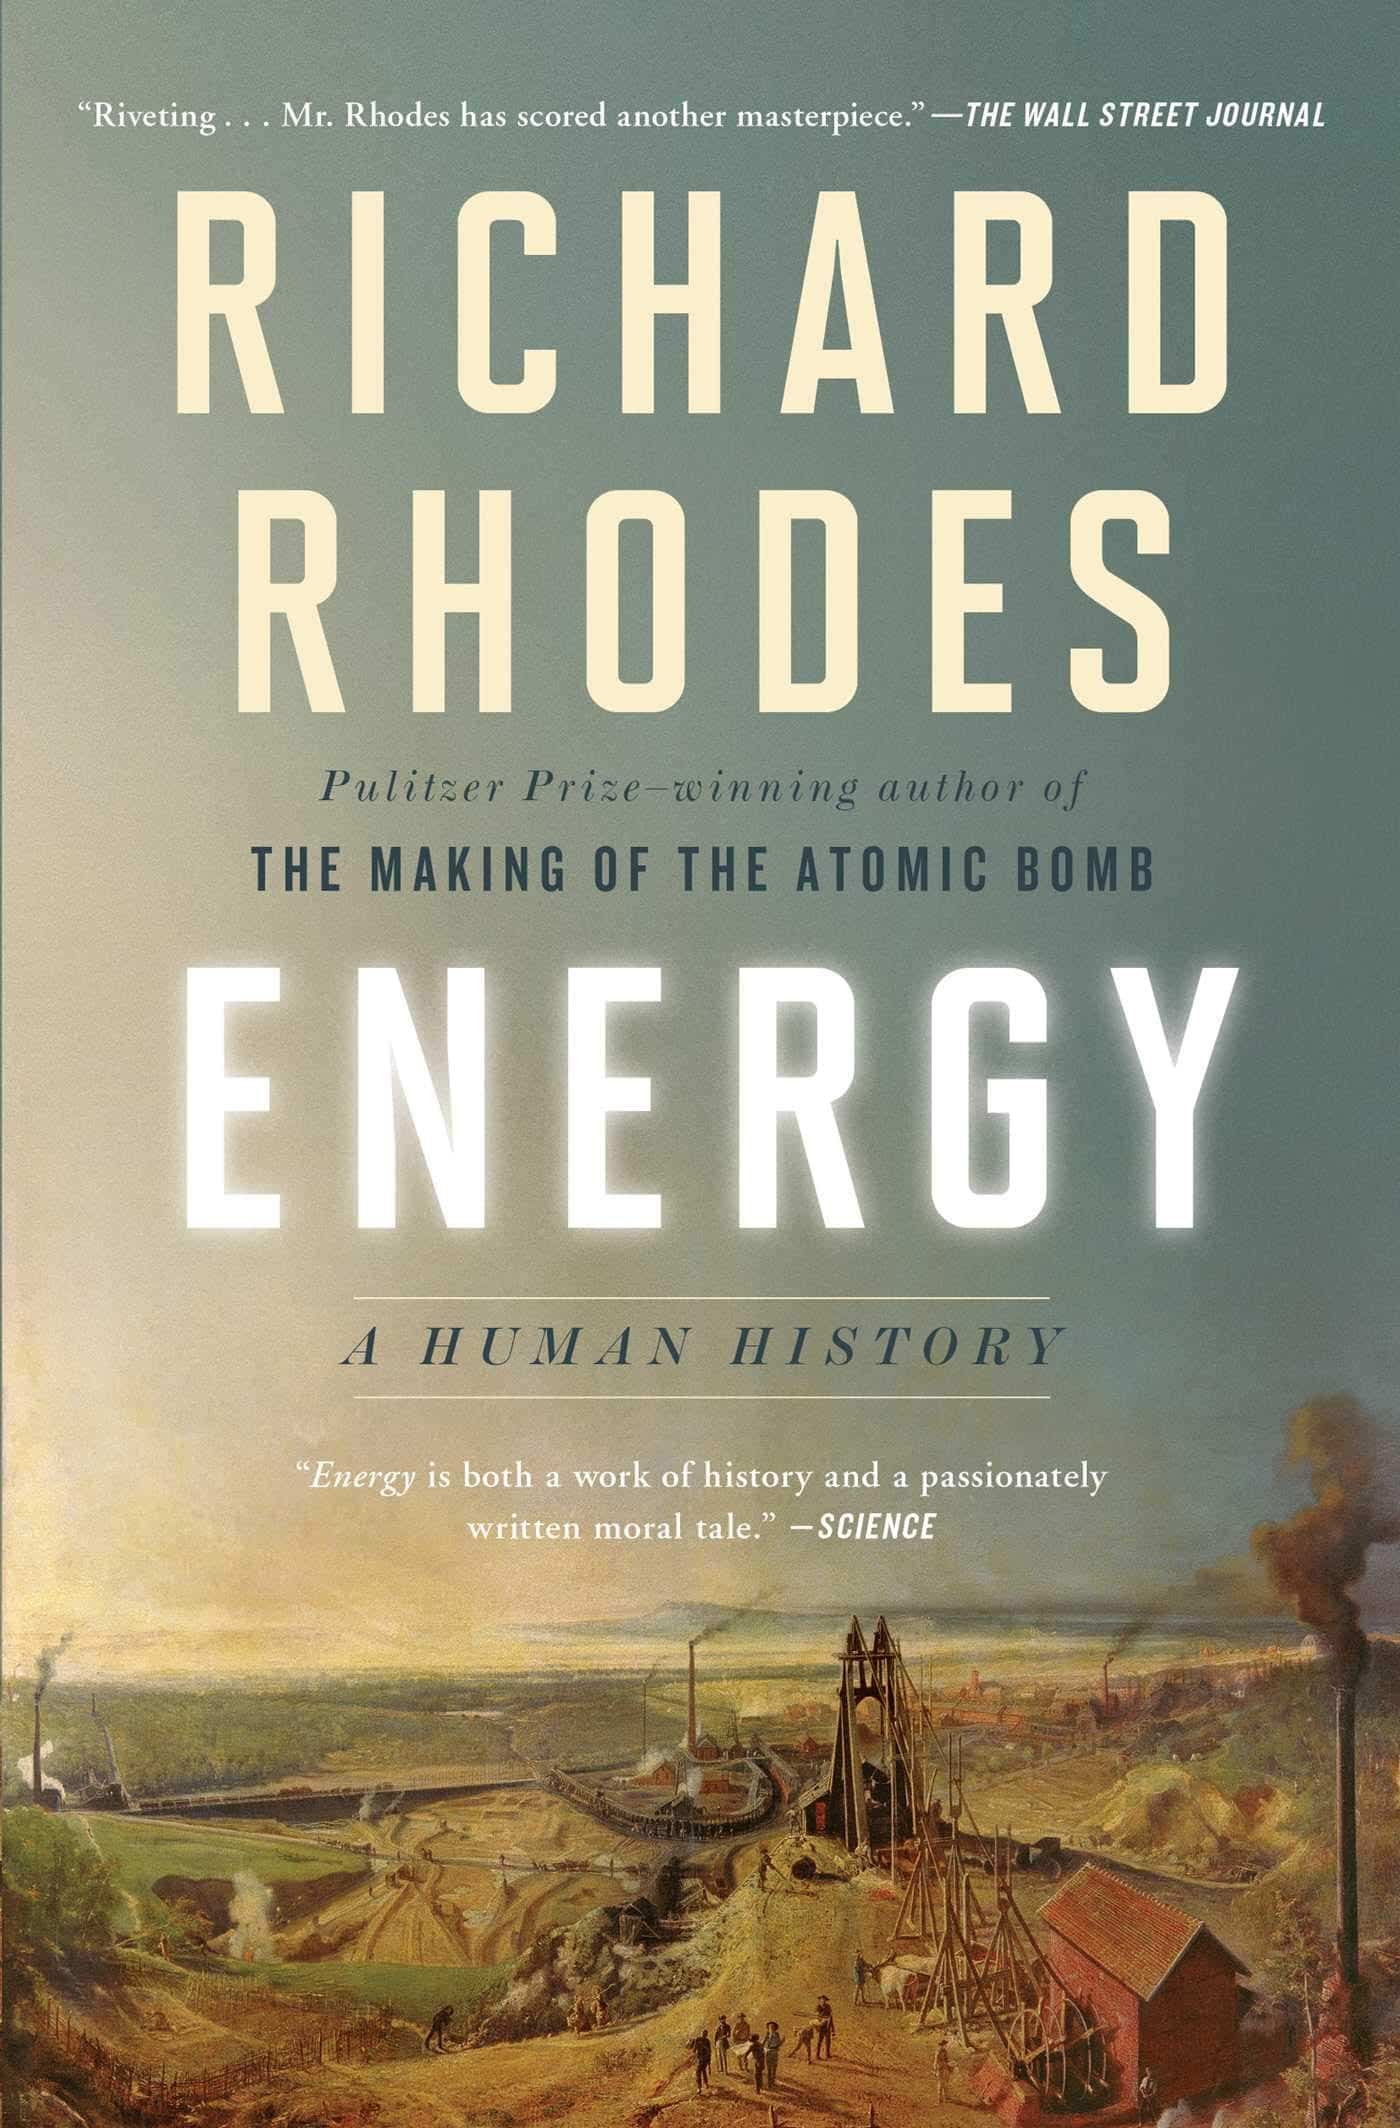 The cover of Energy